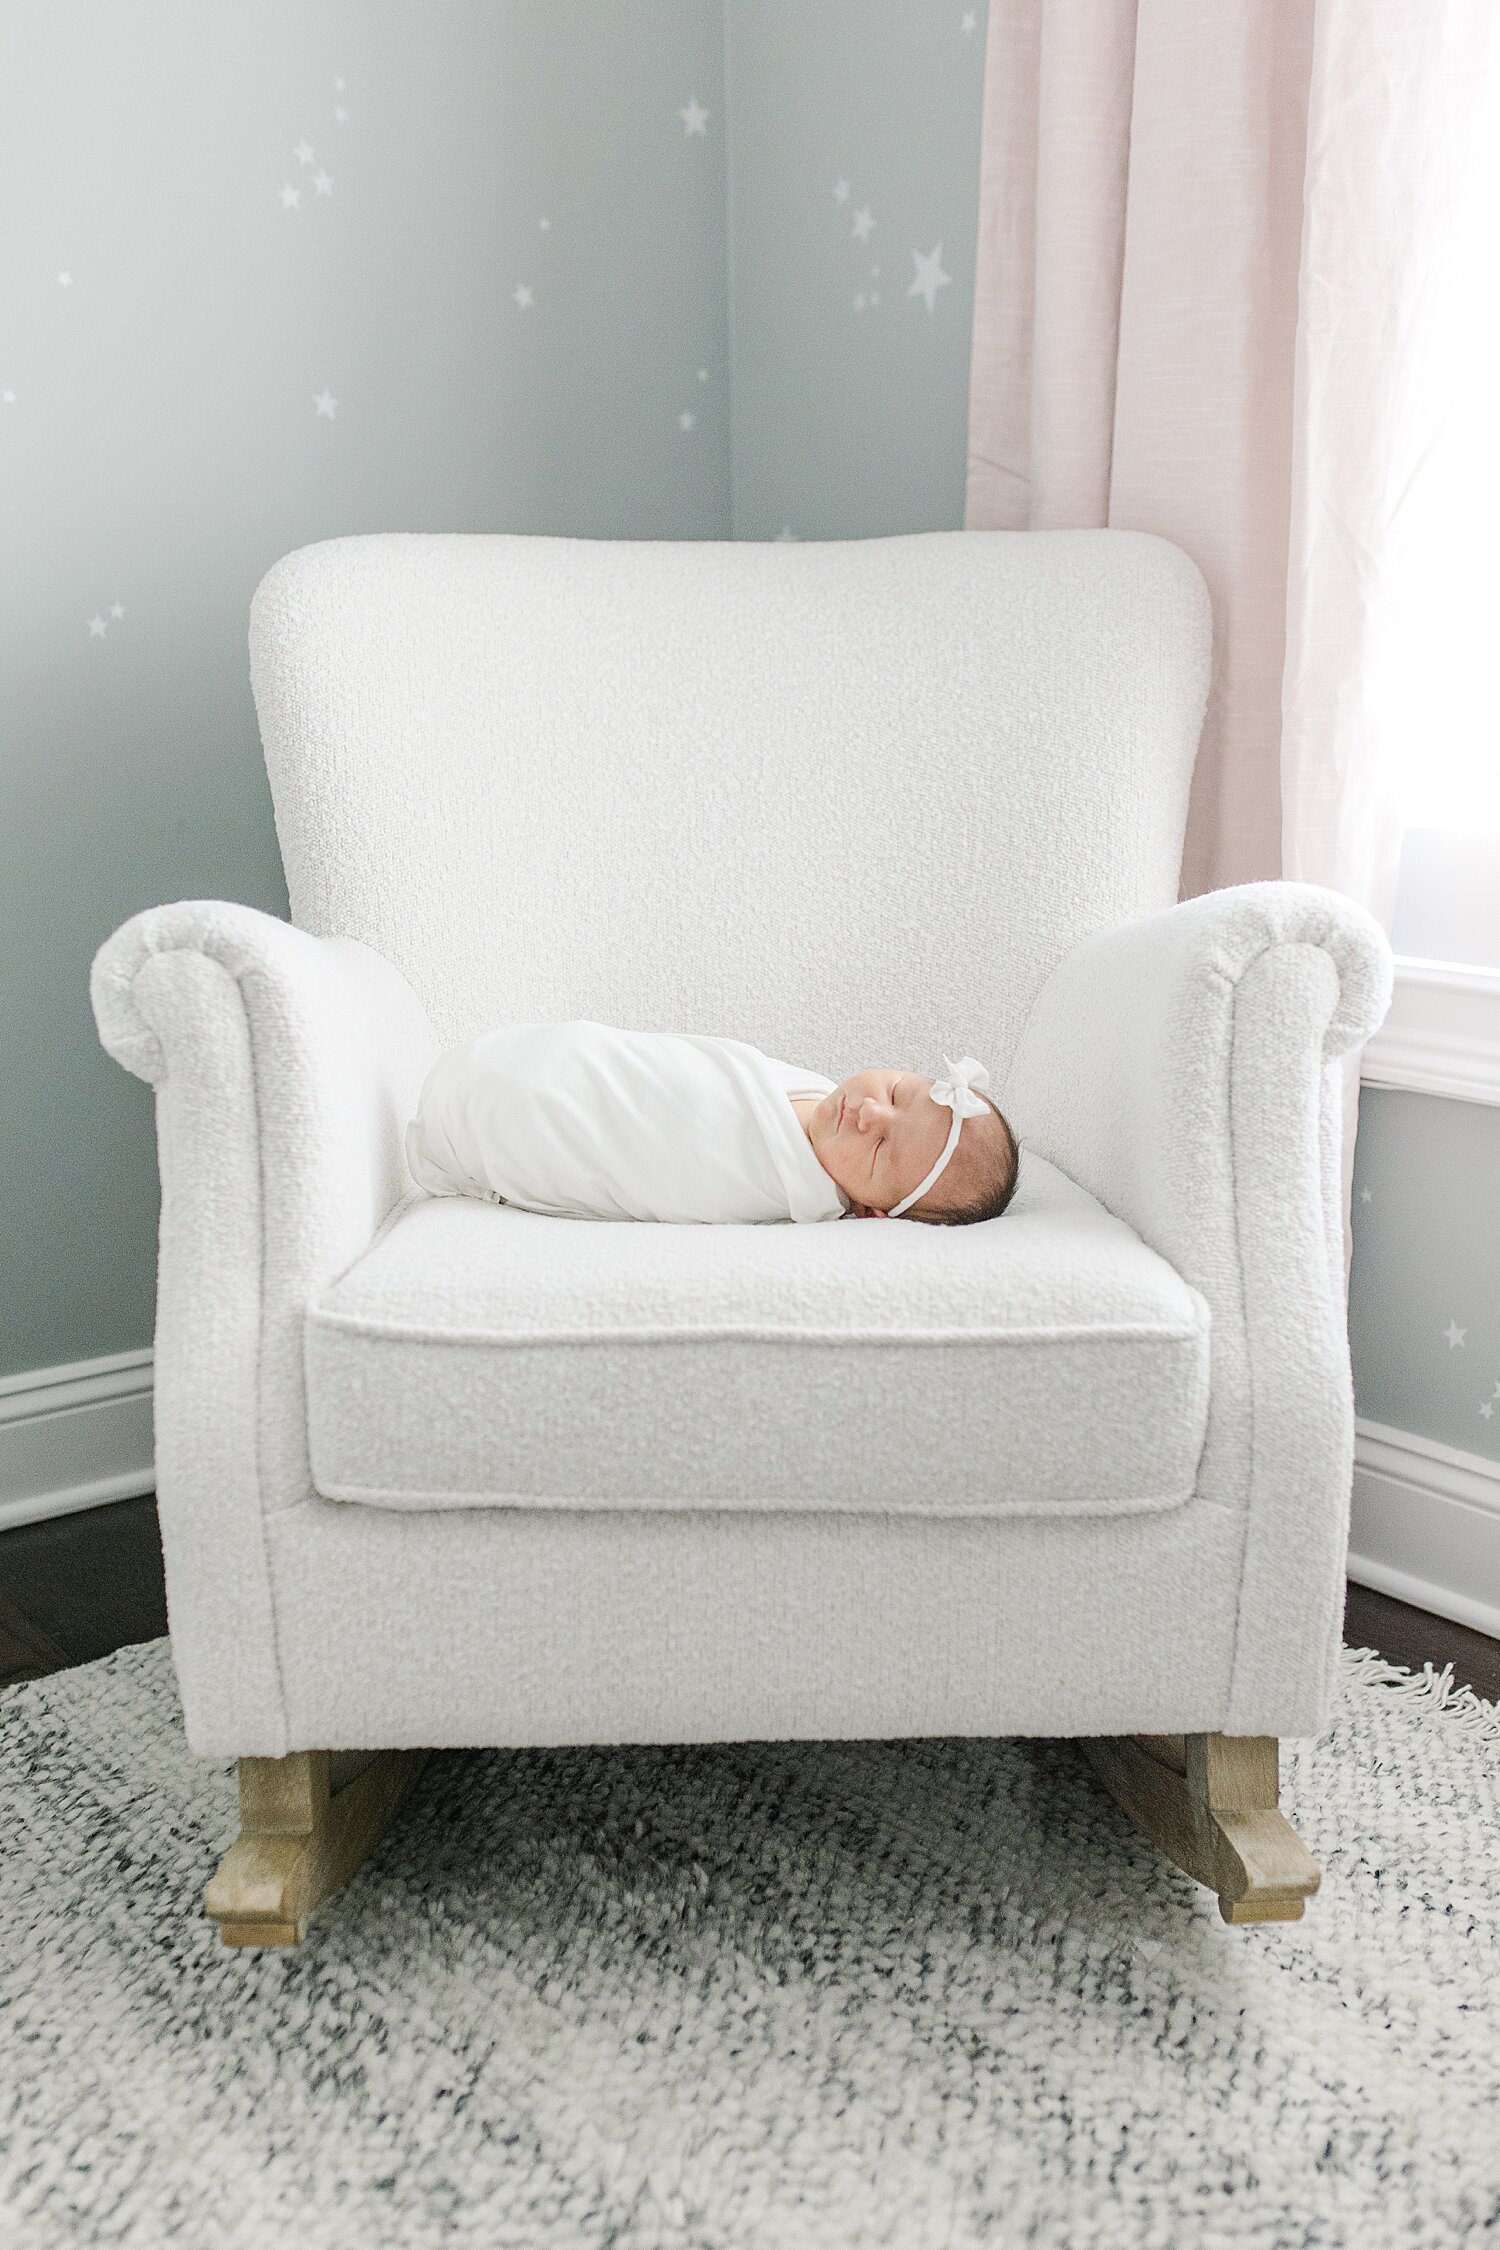 Newborn laying on chair in nursery. Photo by Kristin Wood Photography.